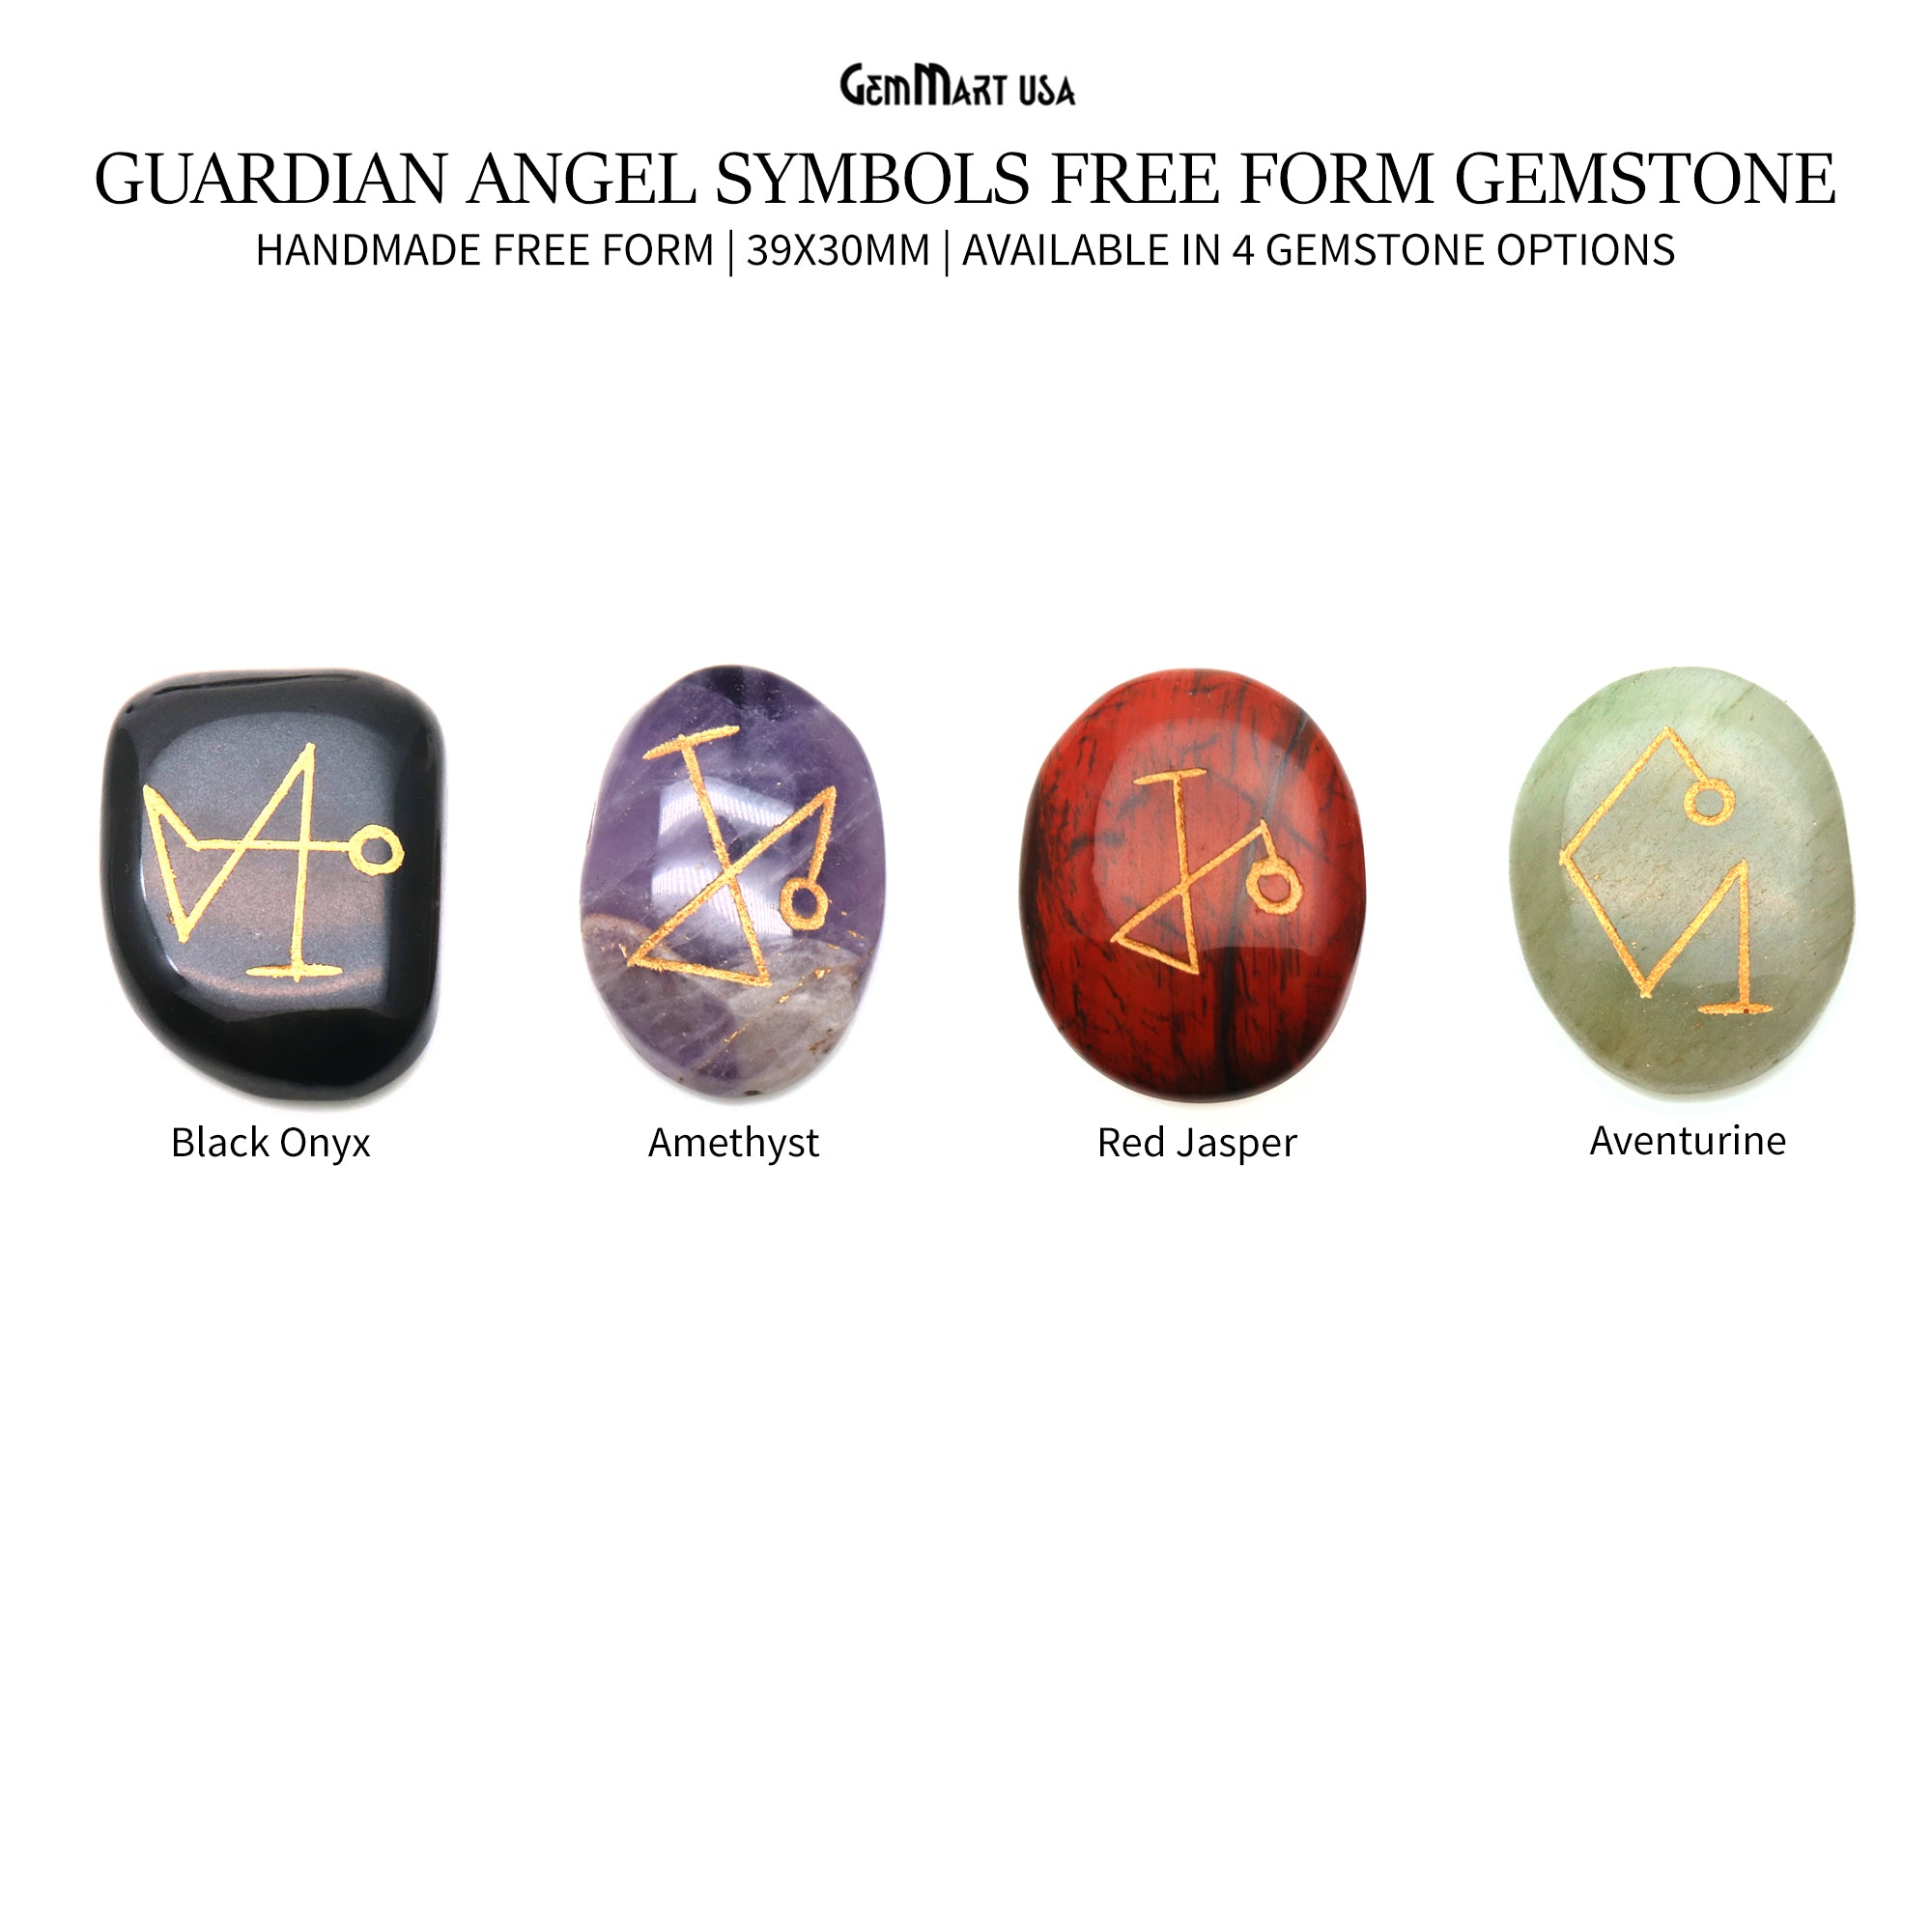 angelic symbols and meanings